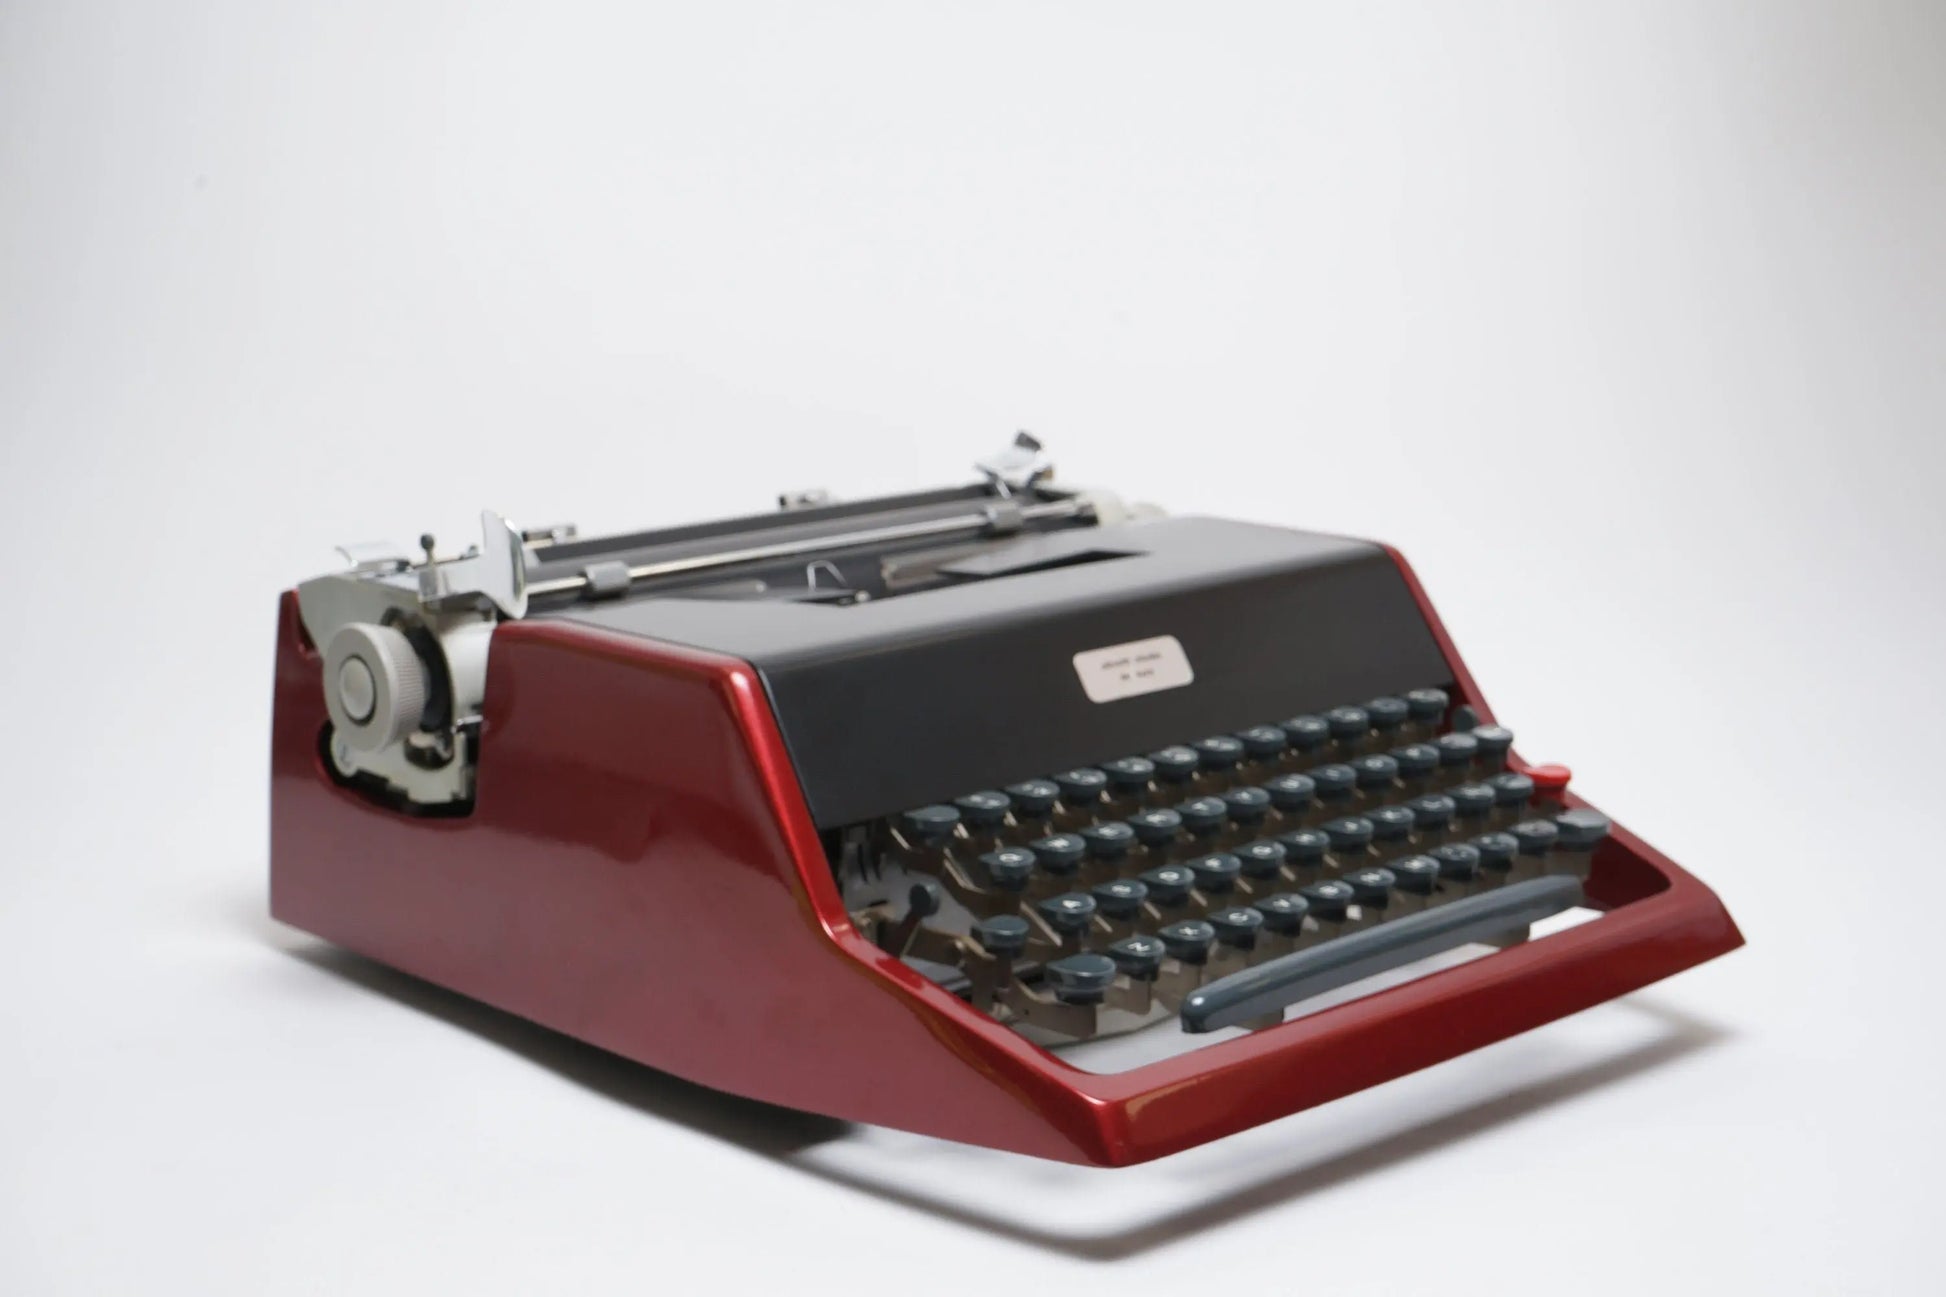 Limited Edition Olivetti Studio de Luxe Typewriter, Vintage, Mint Condition, Manual Portable, Professionally Serviced by Typewriter.Company - ElGranero Typewriter.Company